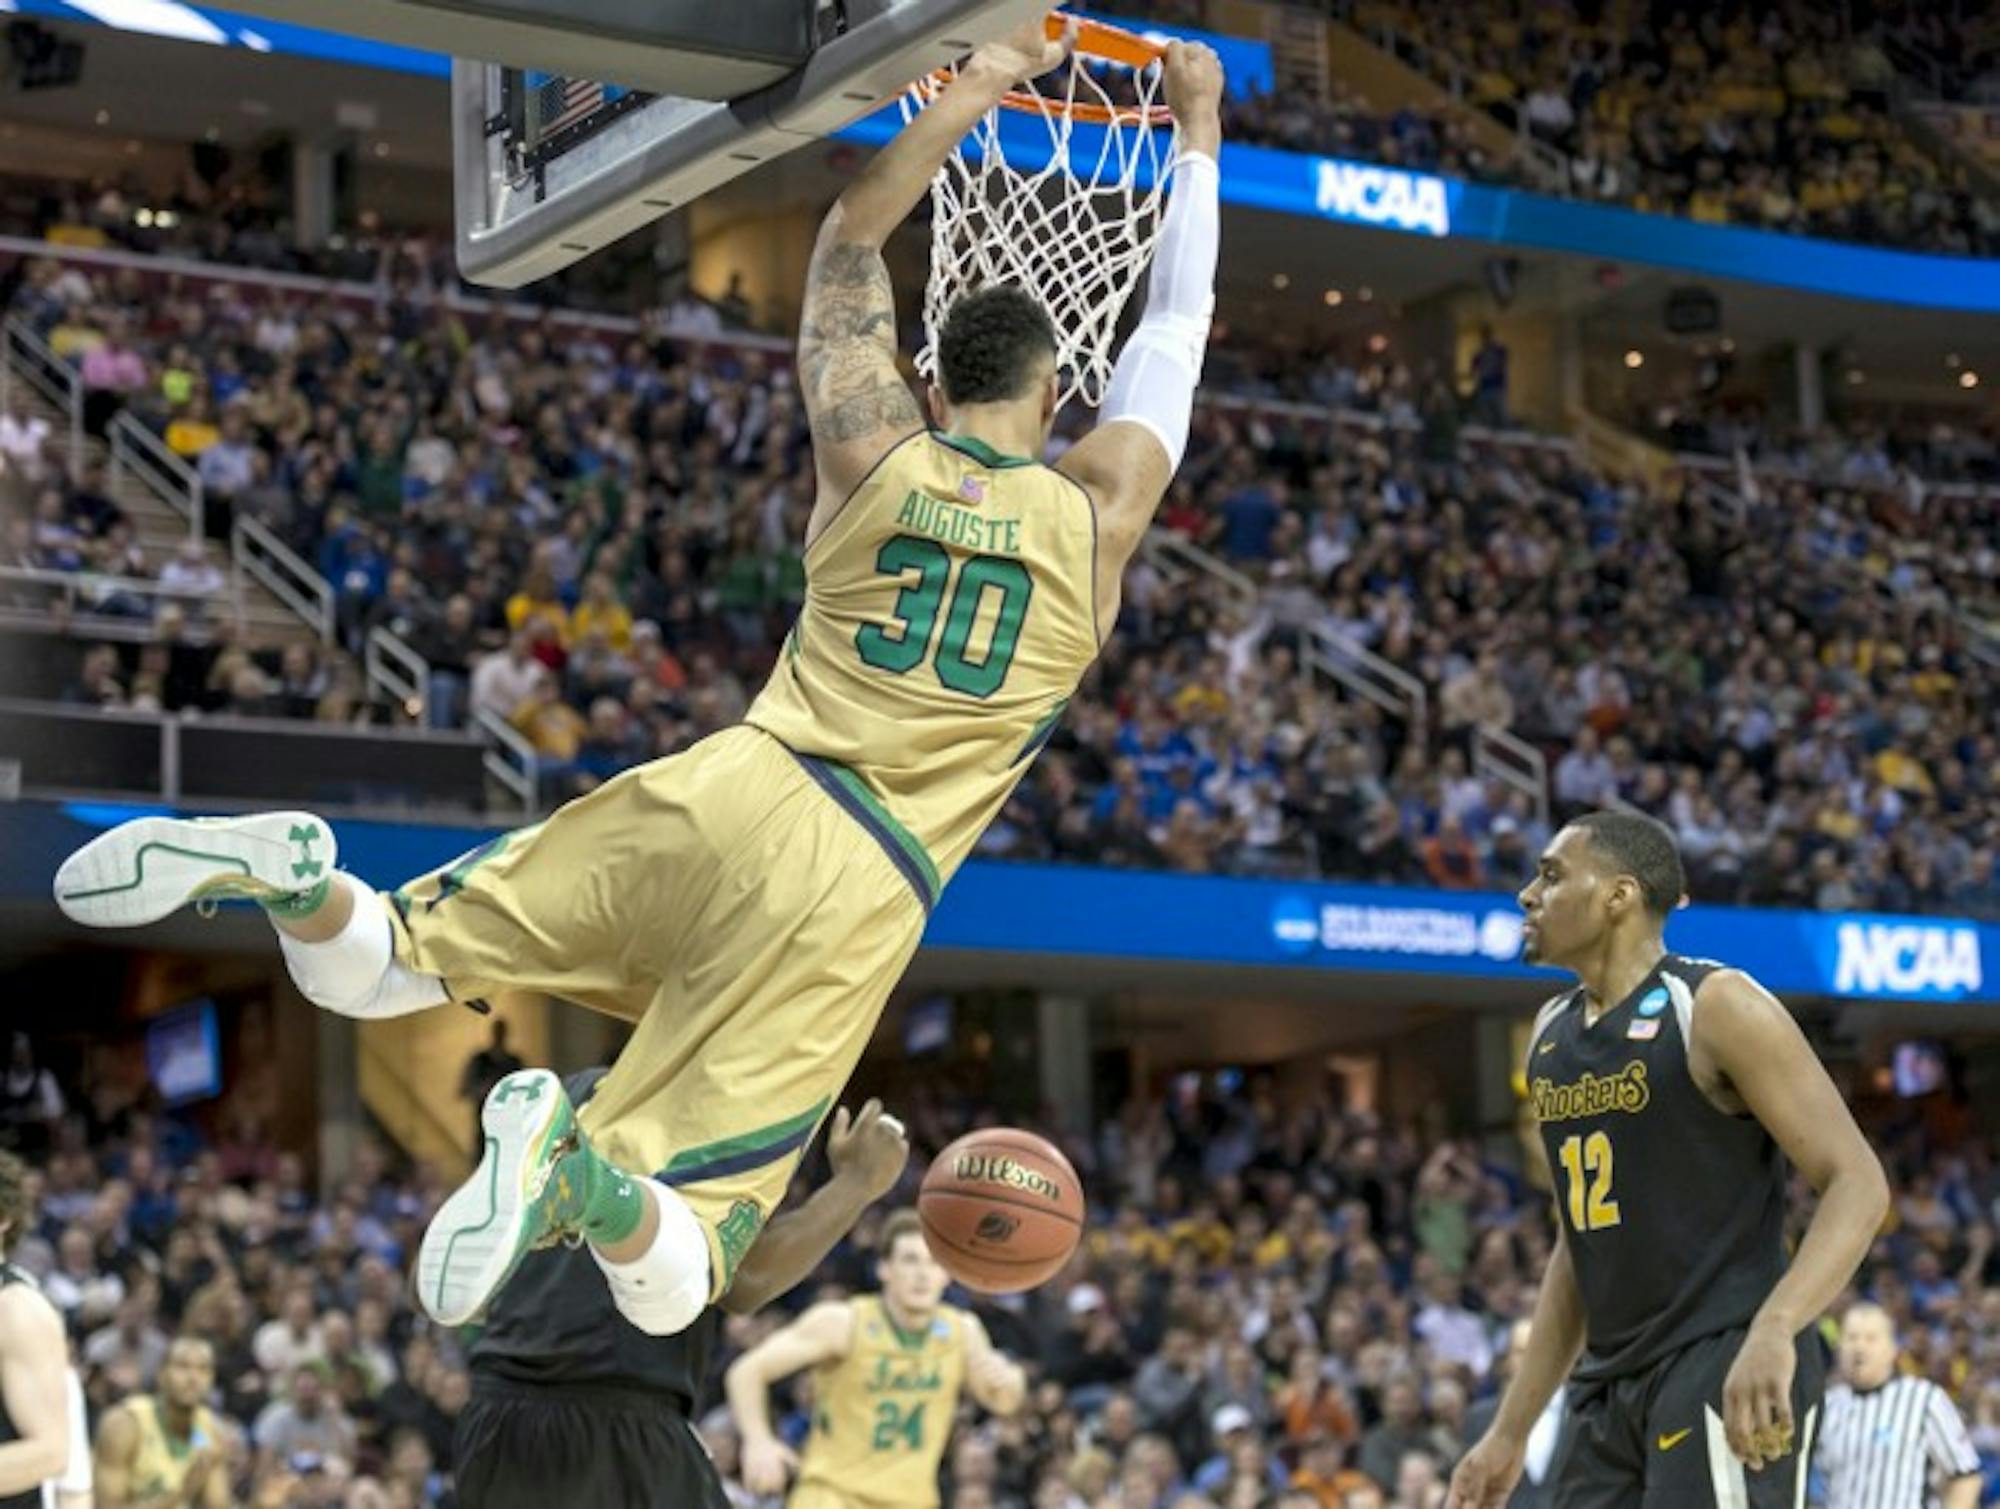 Irish junior forward Zach Auguste swings on the rim after dunking for two of his 15 points during Notre Dame’s 81-70 win over Wichita State in their Sweet 16 game. Auguste also pulled down six rebounds.